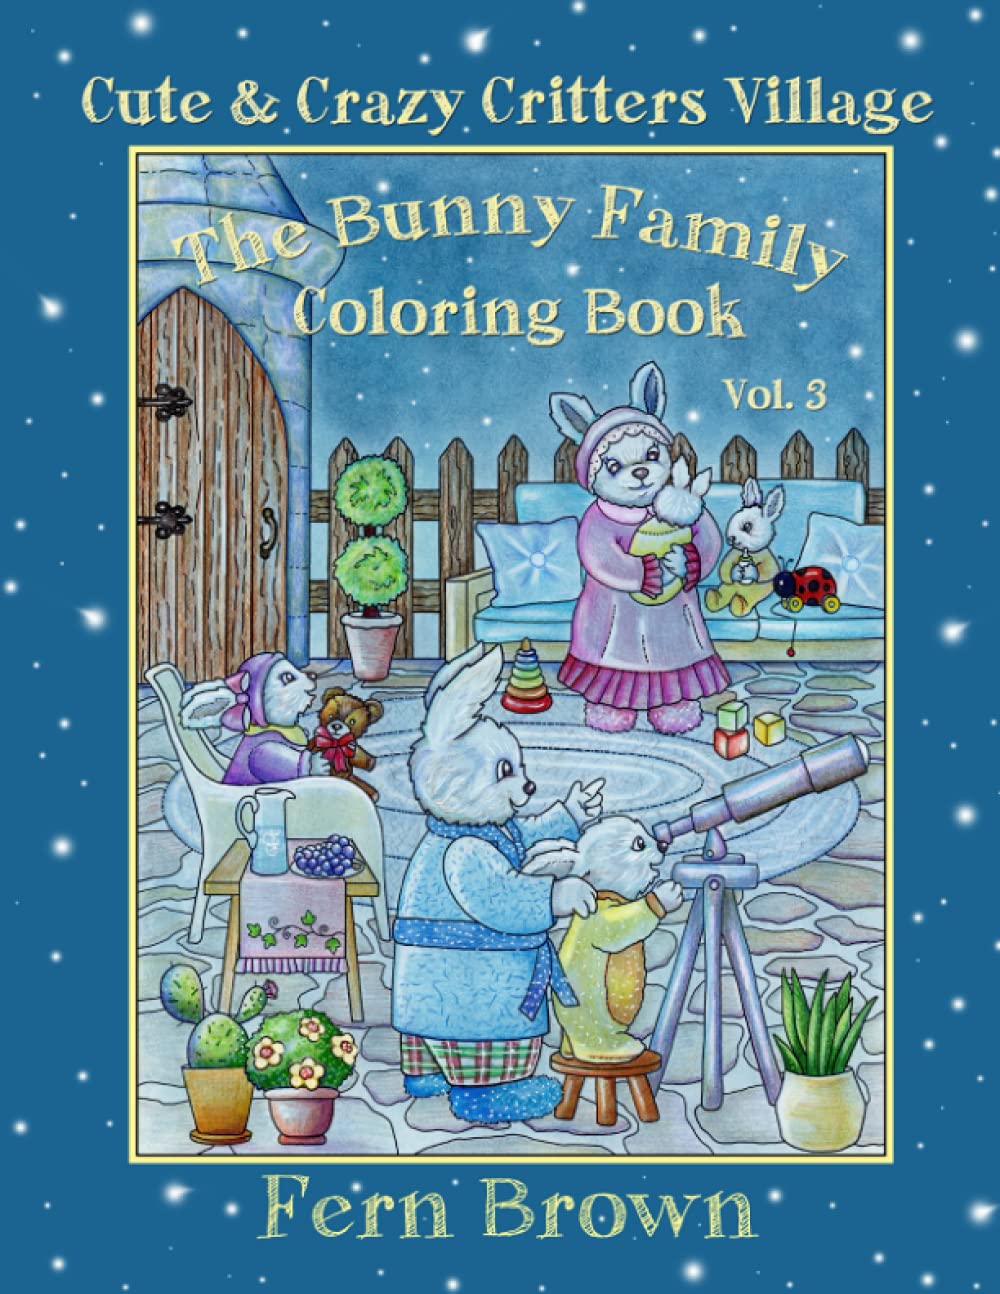 Cute and Crazy Critters Village - the Bunny Family - Vol. 3 Coloring Book (Paperback)